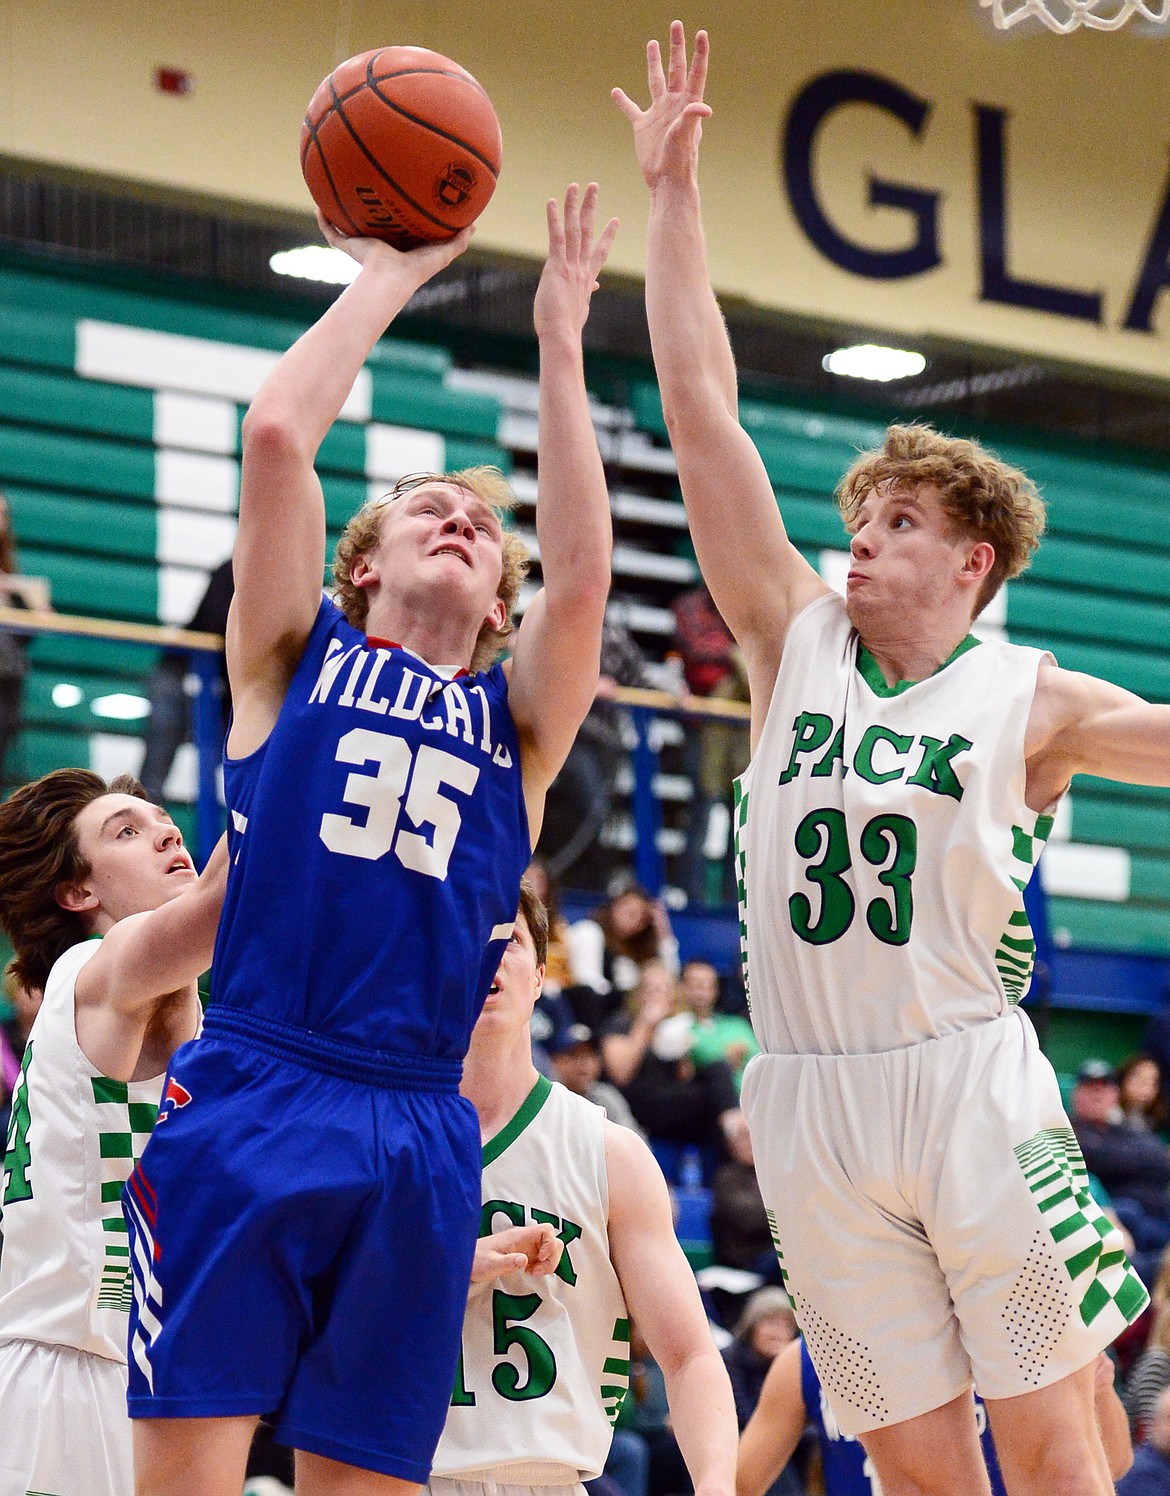 Columbia Falls' Allec Knapton drives to the basket against Glacier's Colin Presnell in the second half at Glacier High School on Thursday. (Casey Kreider/Daily Inter Lake)